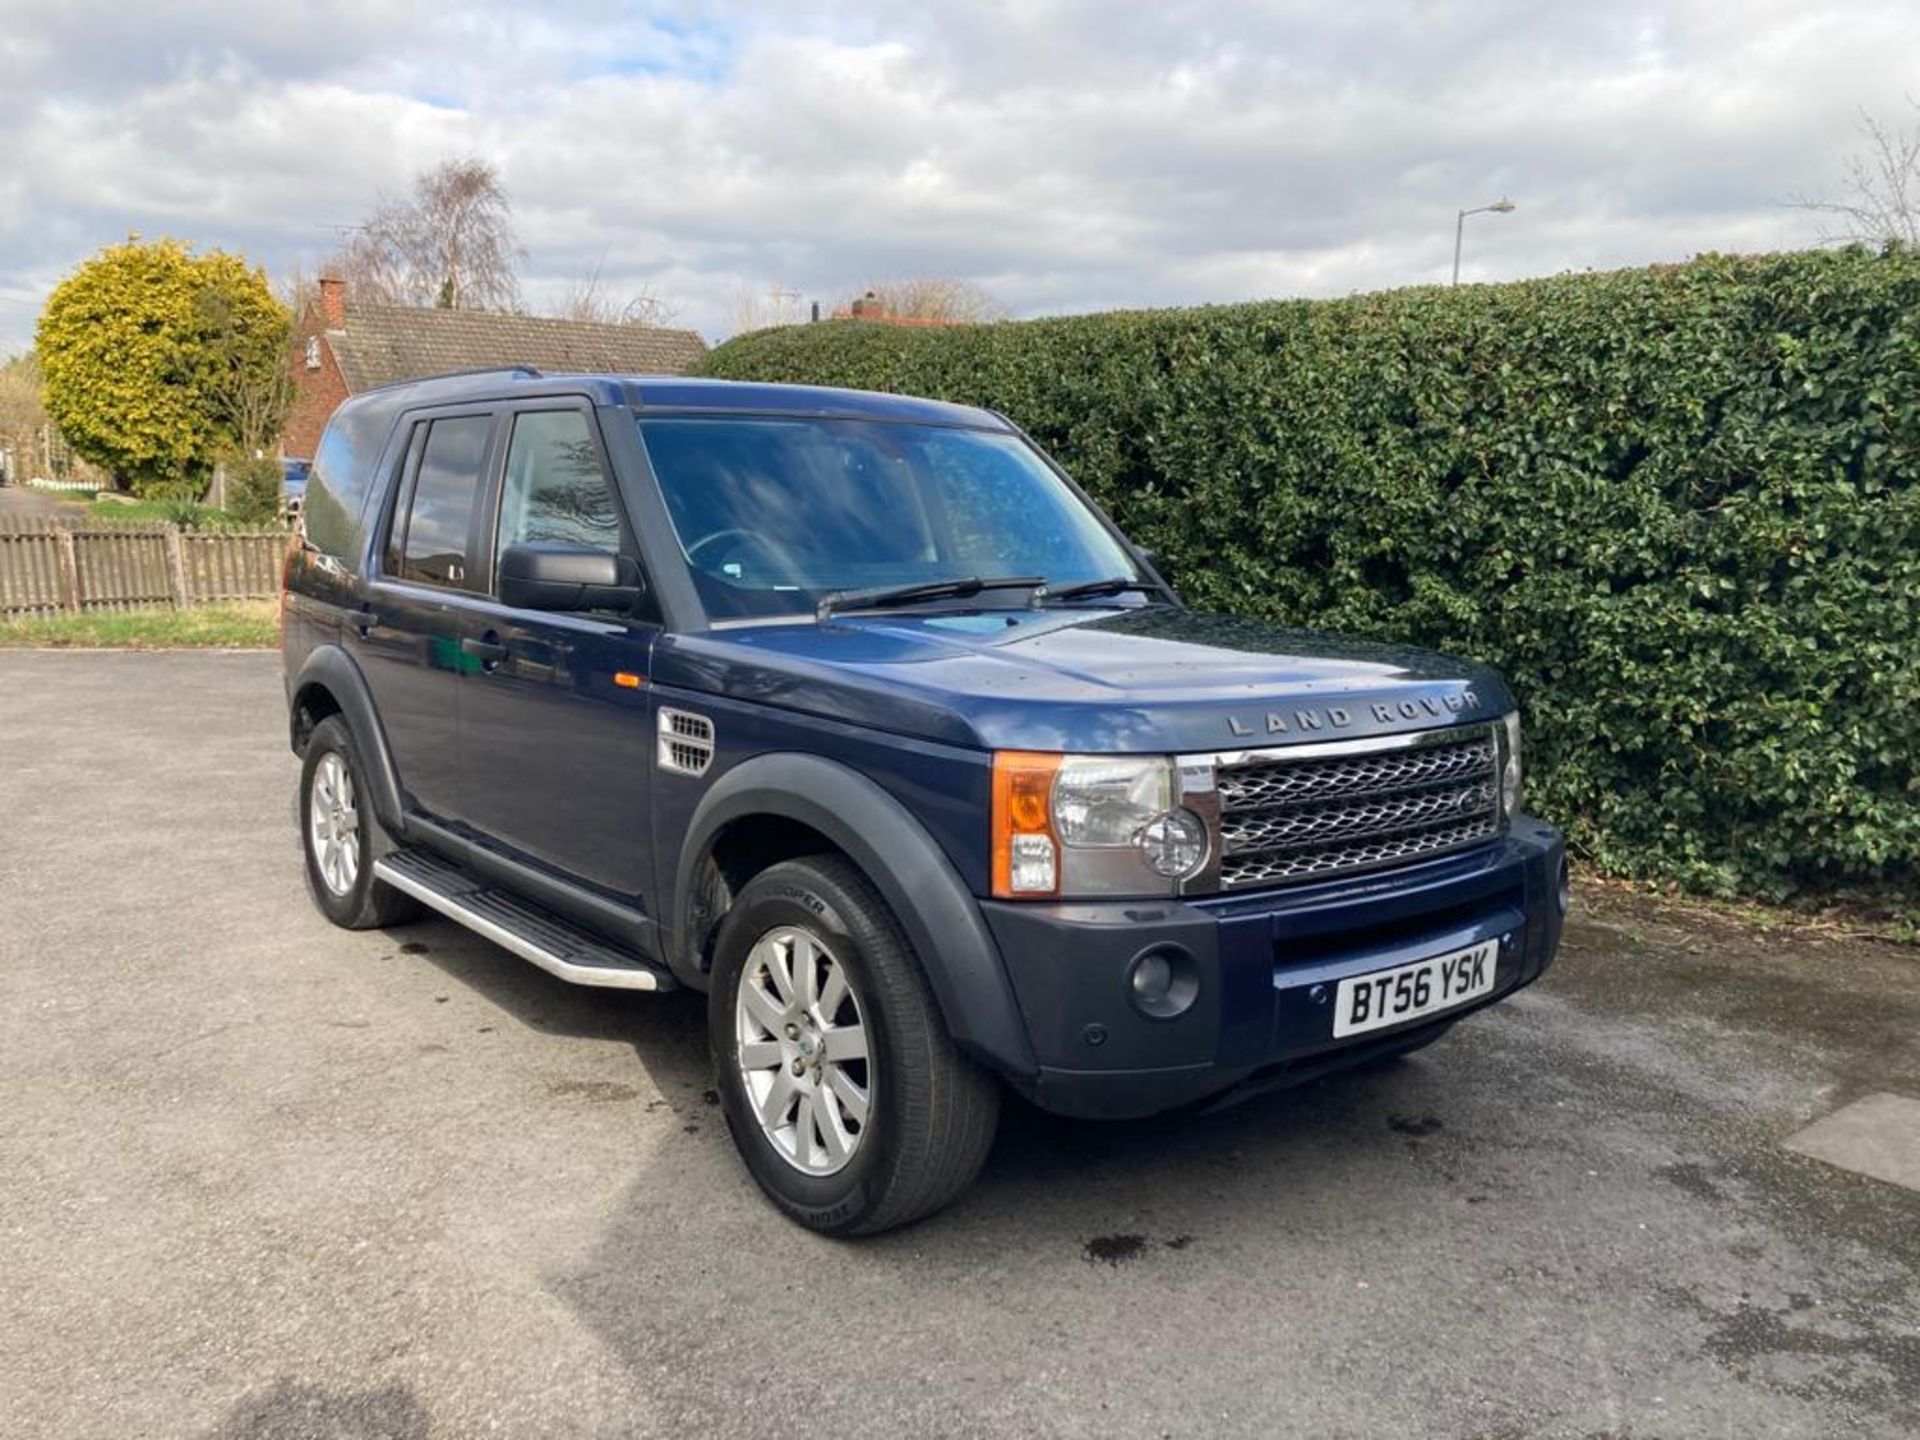 2007/56 REG LAND ROVER DISCOVERY 3 TDV6 SE AUTOMATIC 2.7 DIESEL, SHOWING 4 FORMER KEEPERS *NO VAT*